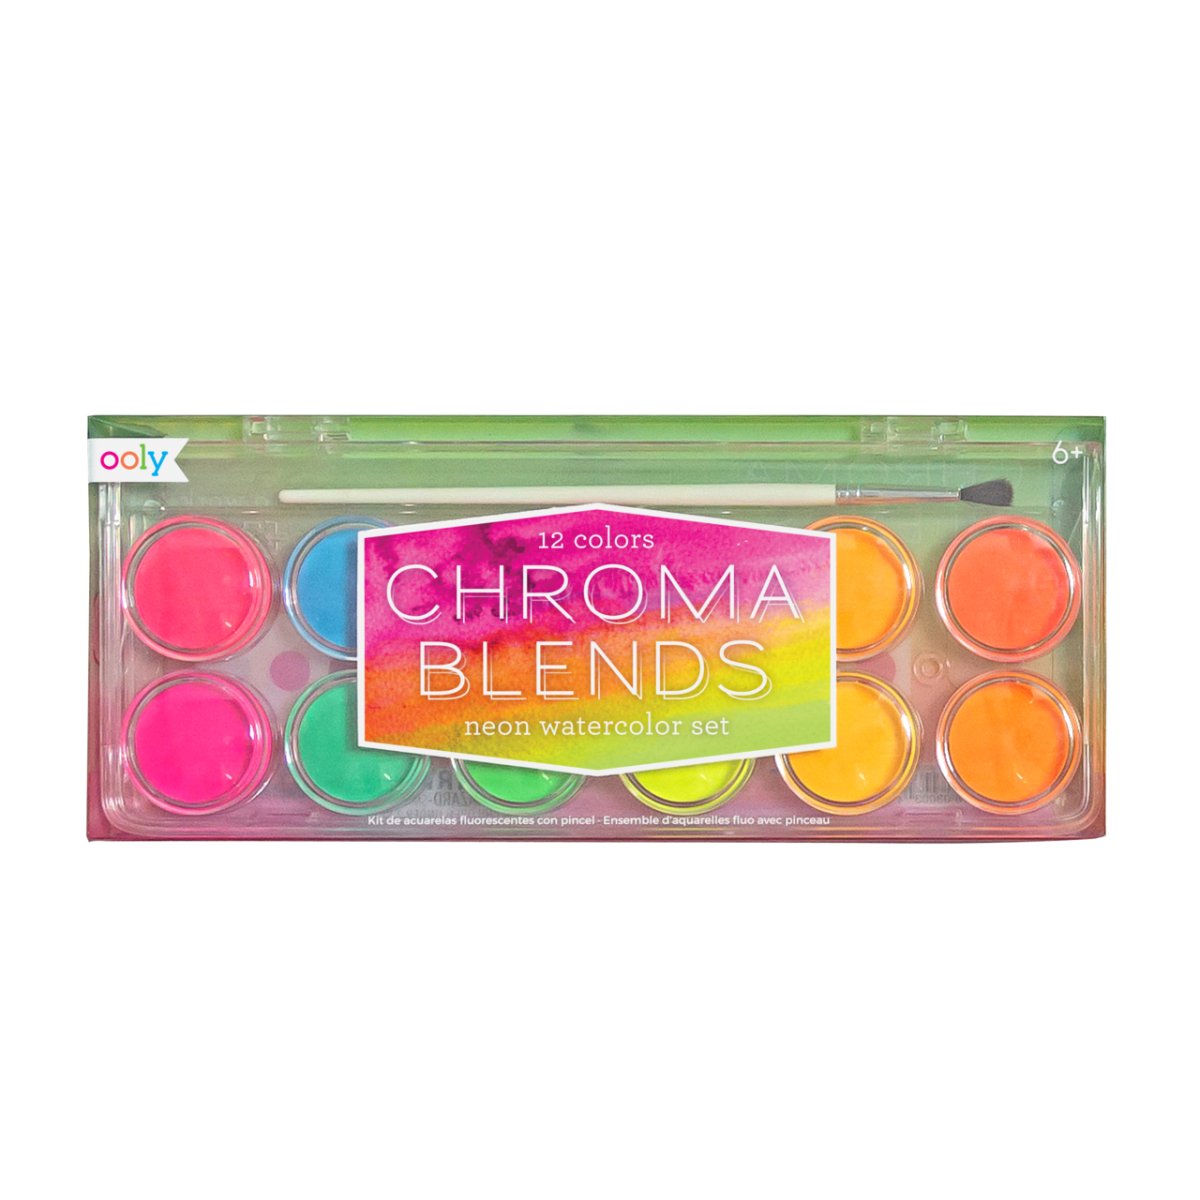 Ooly Chroma Blends Watercolor 12-Color Neon Set with Brush - The Merri Artist - merriartist.com